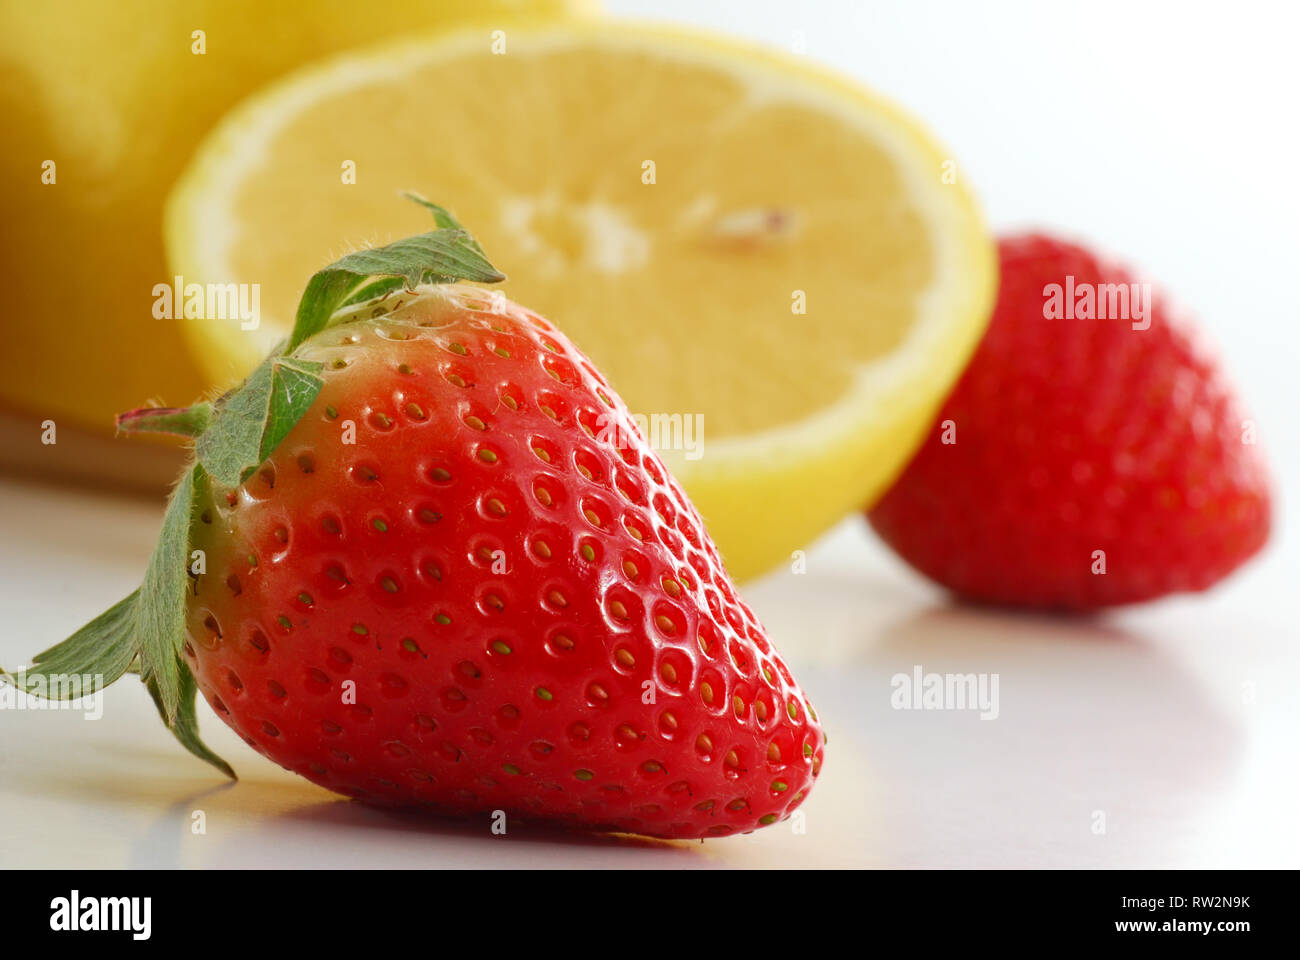 Extreme close-up image of a strawberry with more fruit in background Stock Photo